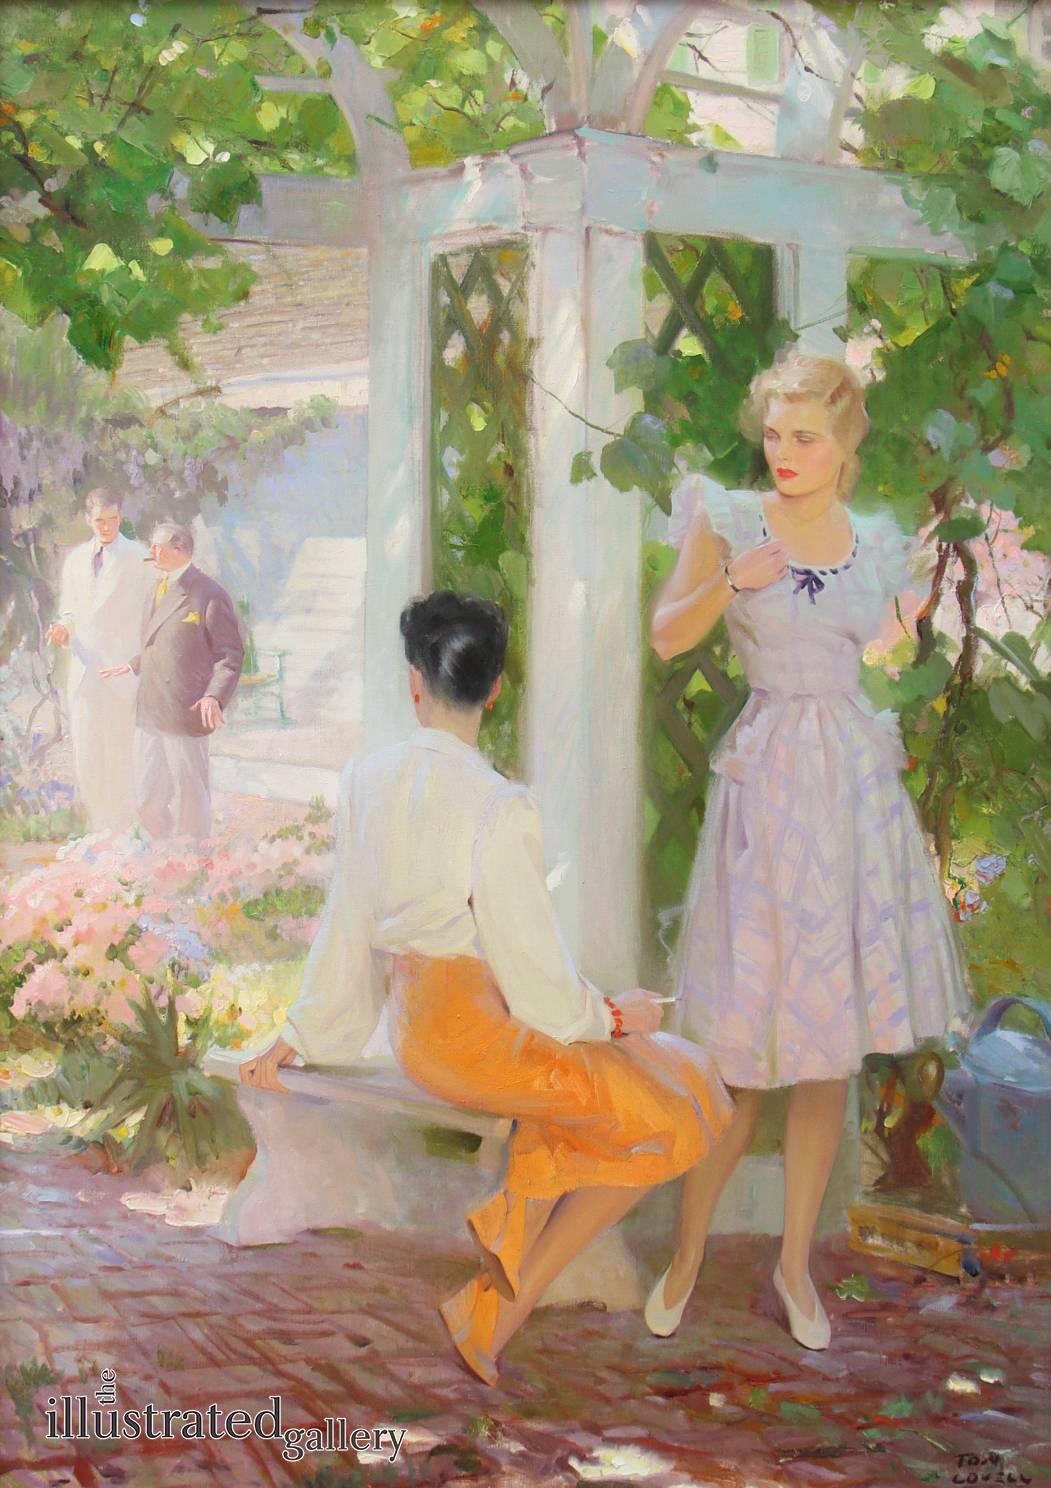 In the Garden - Painting by Tom Lovell